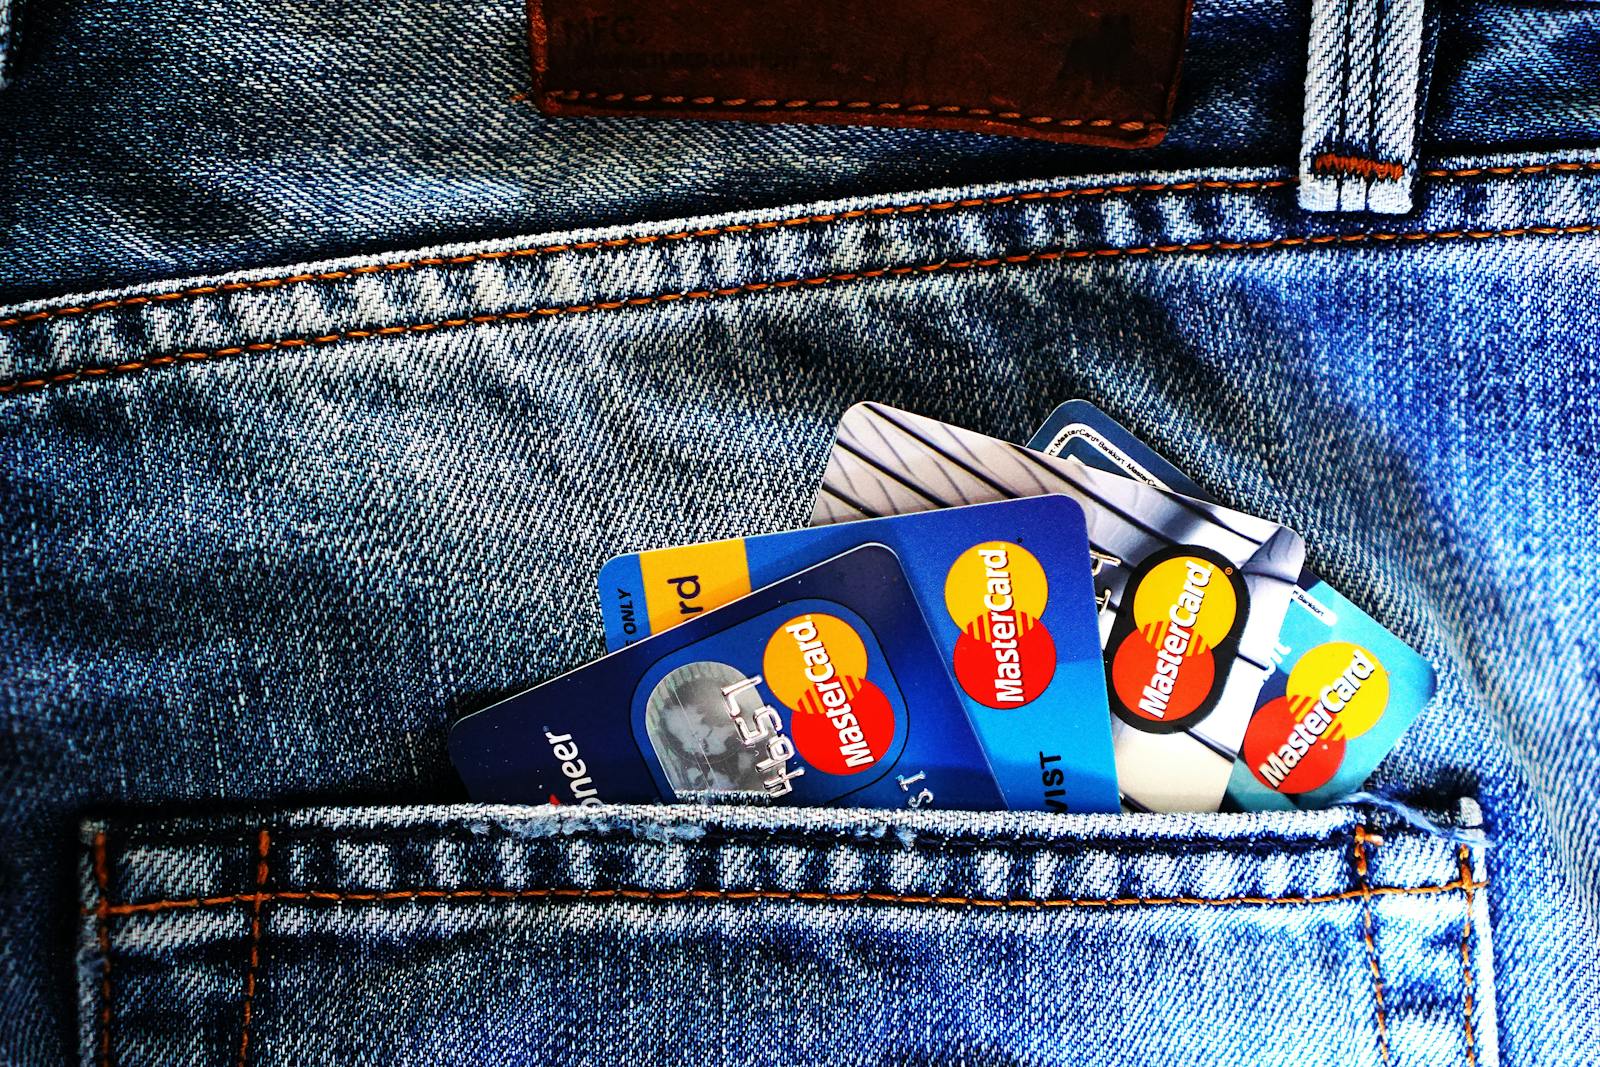 5 Tips for Improving Your Credit Score